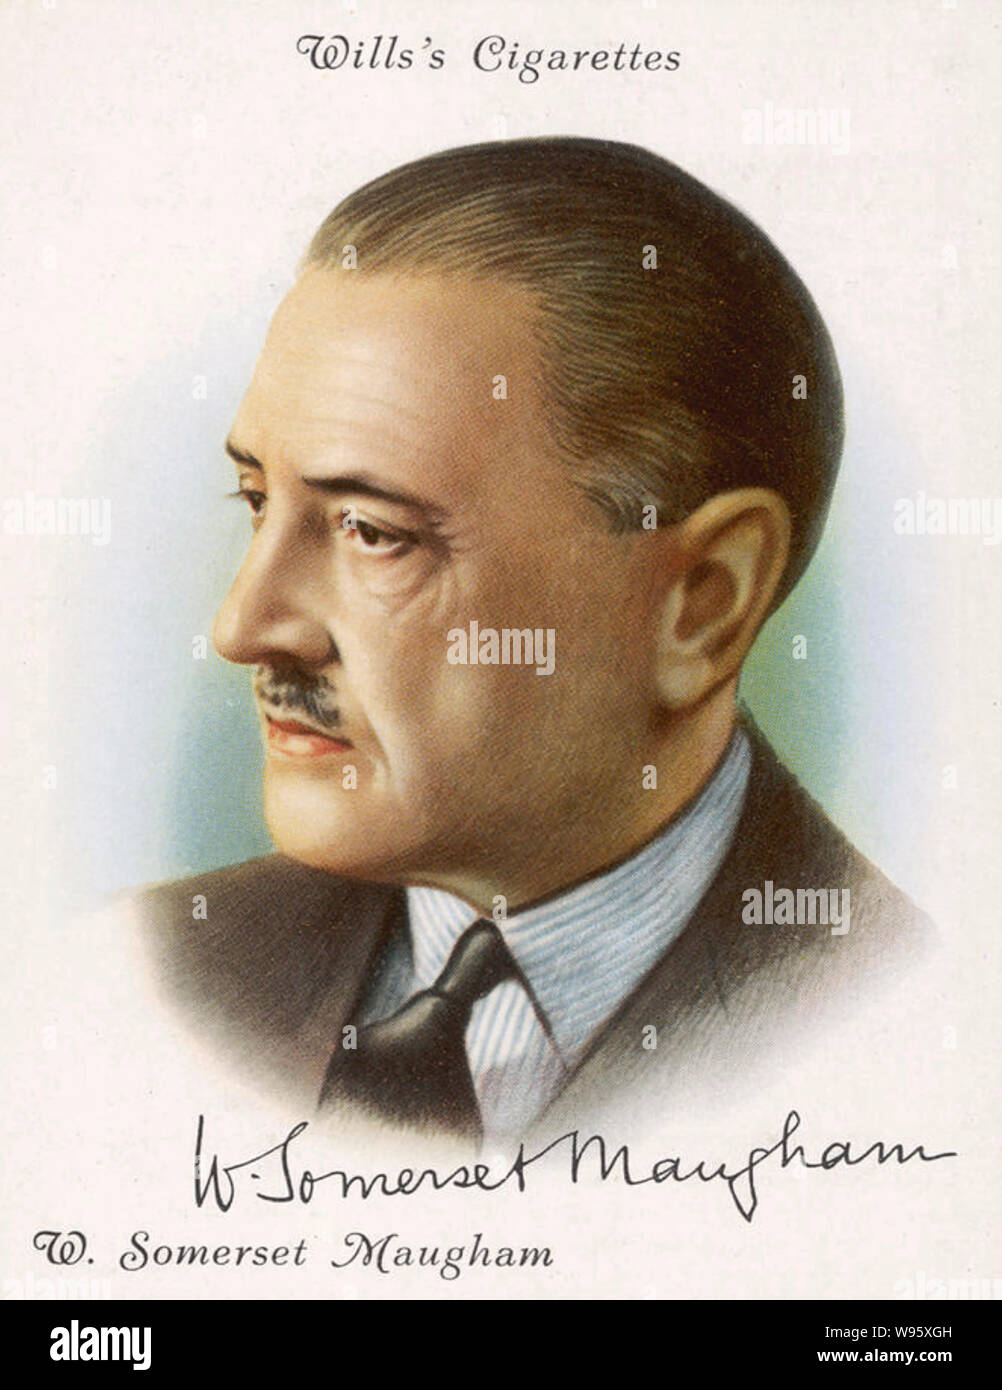 W. SOMERSET MAUGHAM (1874-1965) English, novelist and playwright about 1935 Stock Photo